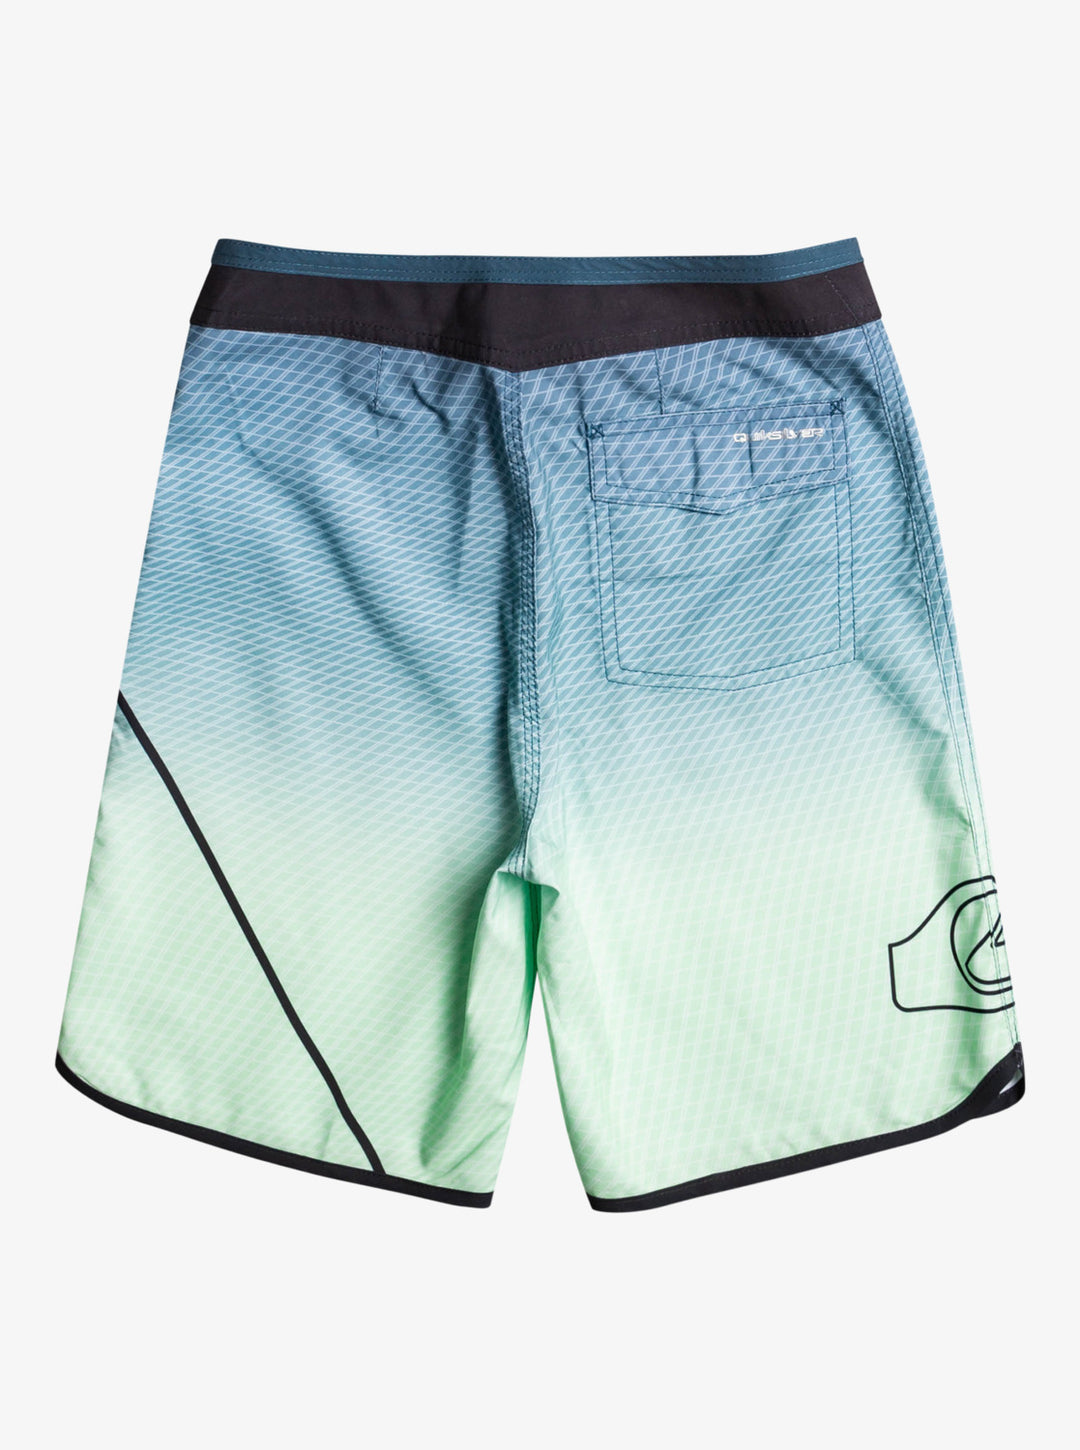 Youth Everyday New Wave 17" Boardshorts - Green Ash